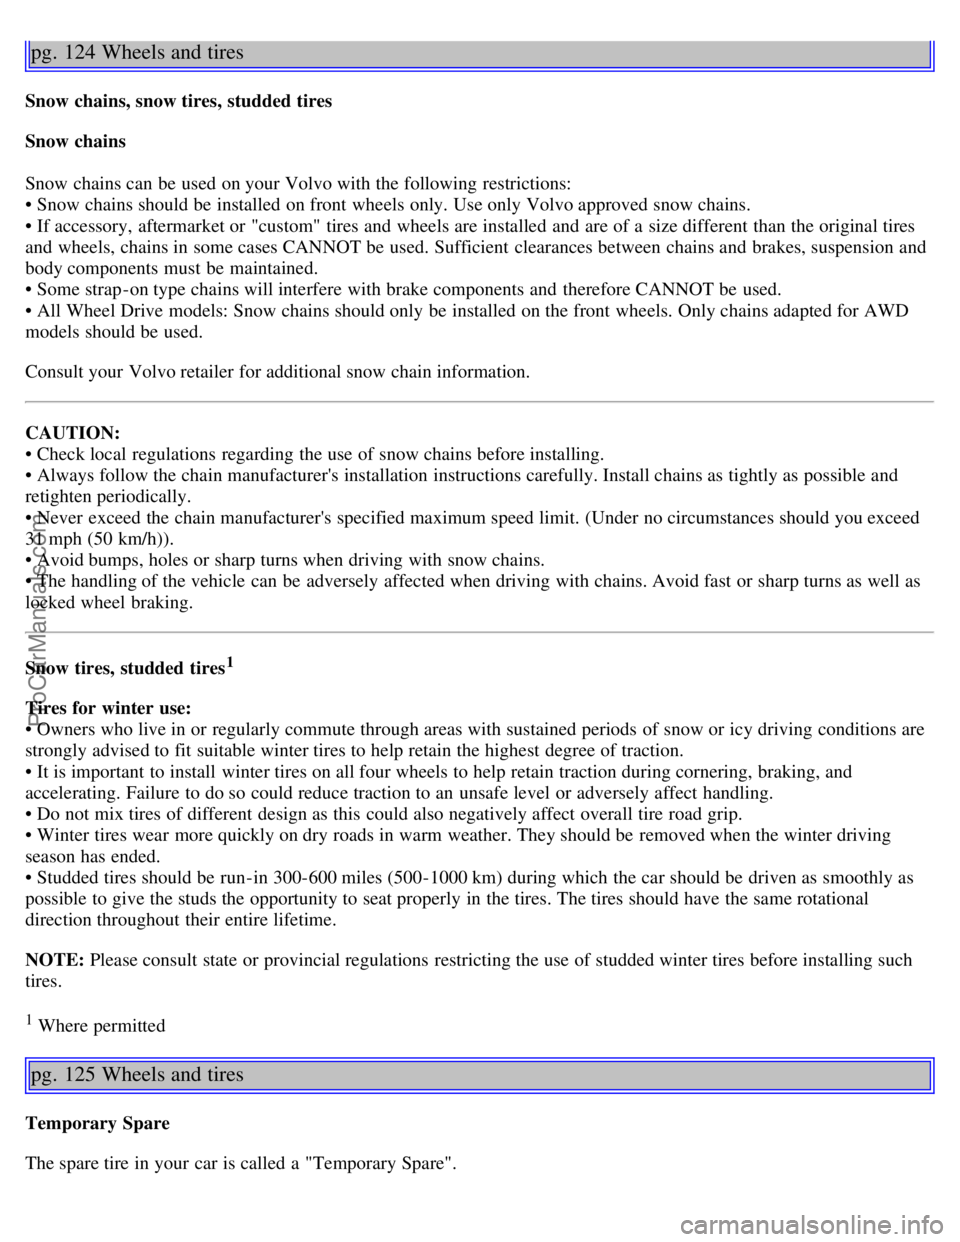 VOLVO V70 2005  Owners Manual pg. 124 Wheels and tires
Snow chains, snow tires, studded tires
Snow chains
Snow chains can be  used on your Volvo with the following restrictions: 
• Snow chains should be  installed on front  whee